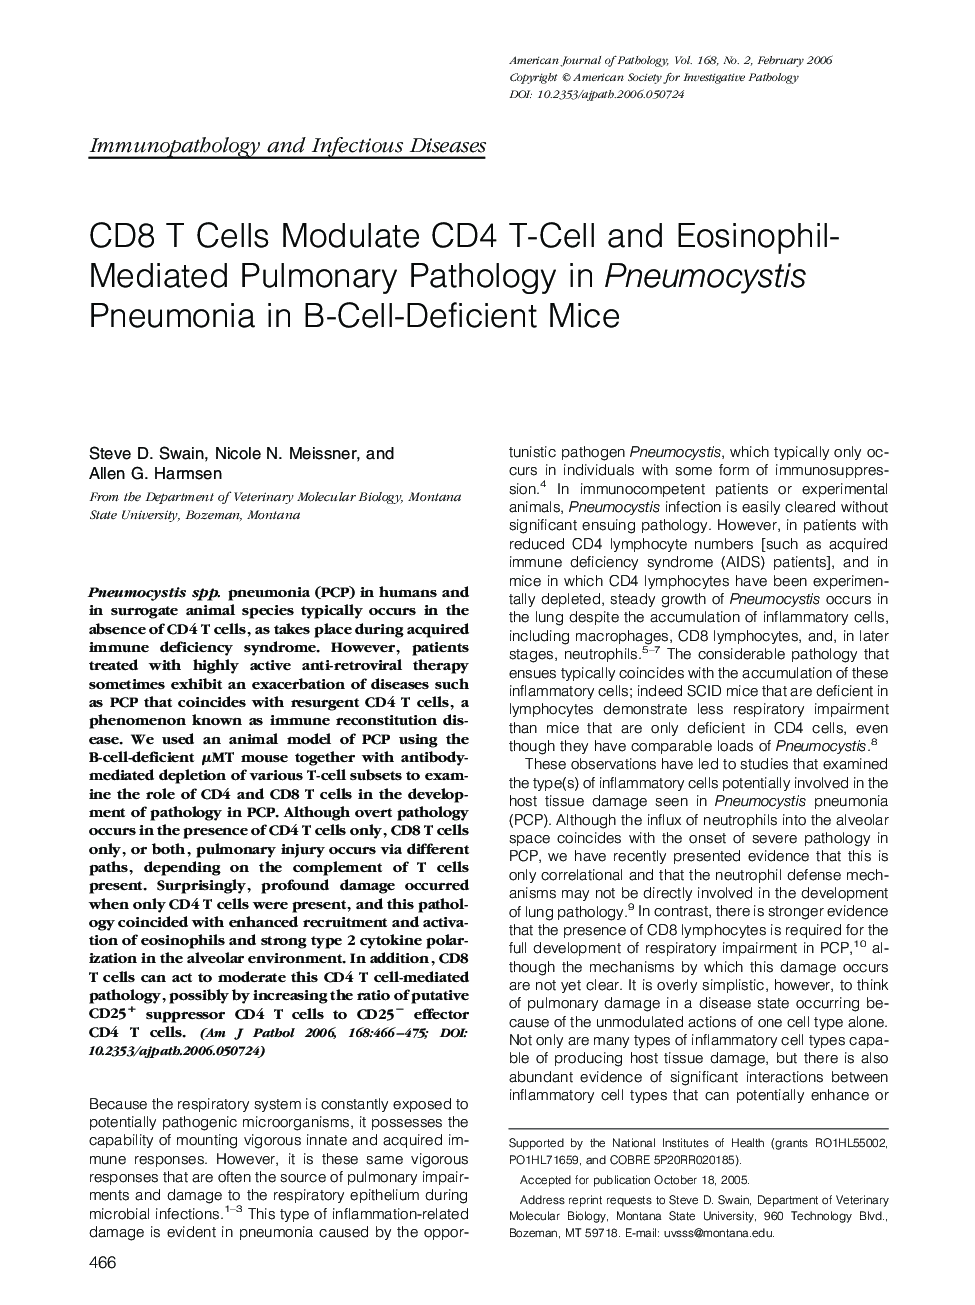 CD8 T Cells Modulate CD4 T-Cell and Eosinophil-Mediated Pulmonary Pathology in Pneumocystis Pneumonia in B-Cell-Deficient Mice